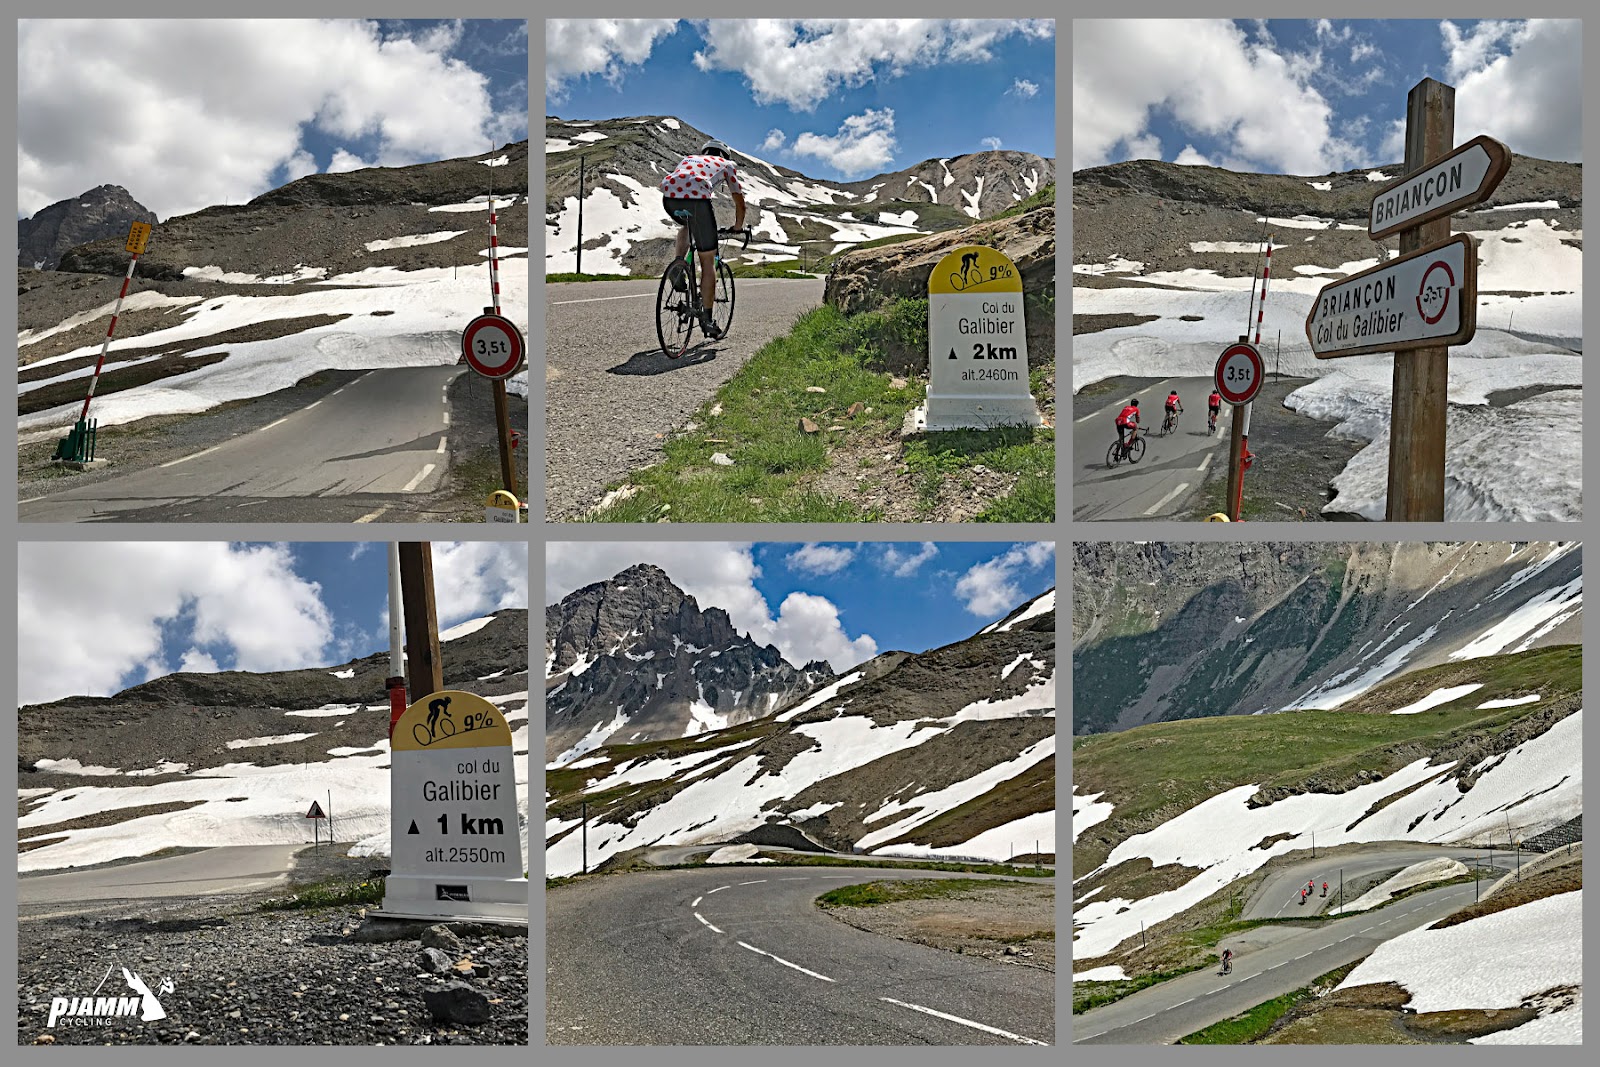 Cycling Col du Galibier from Valloire: photo collage shows PJAMM Cyclists riding toward snow capped mountain peaks, KM marker signs for Galibier